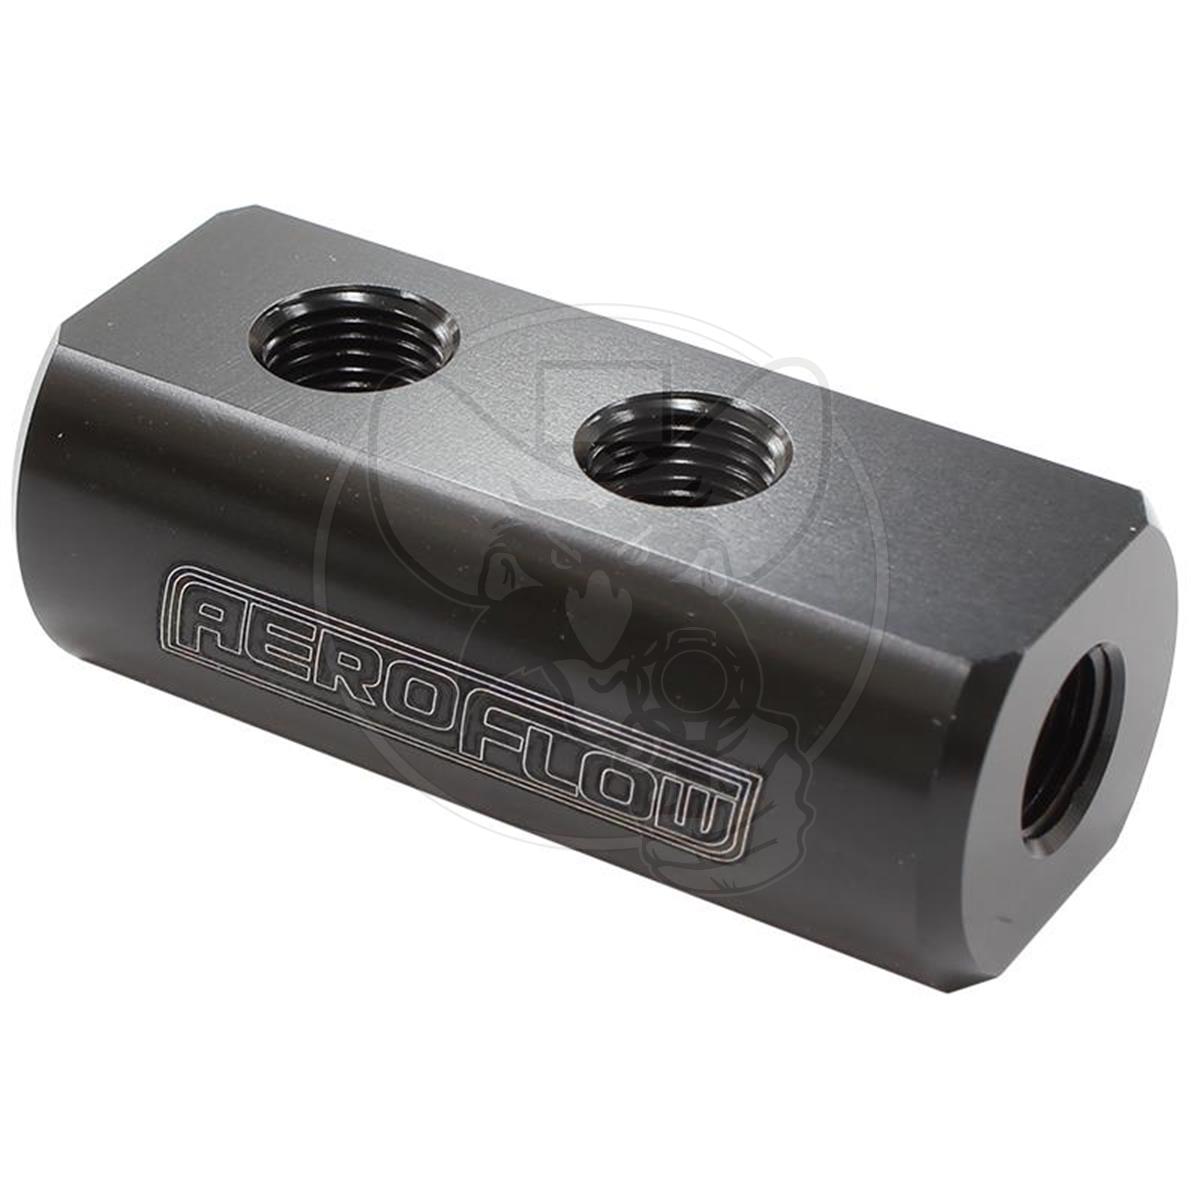 AEROFLOW DISTRIBUTION BLOCK 1 IN 4 OUT - ALL PORTS 1/8" NPT BLK